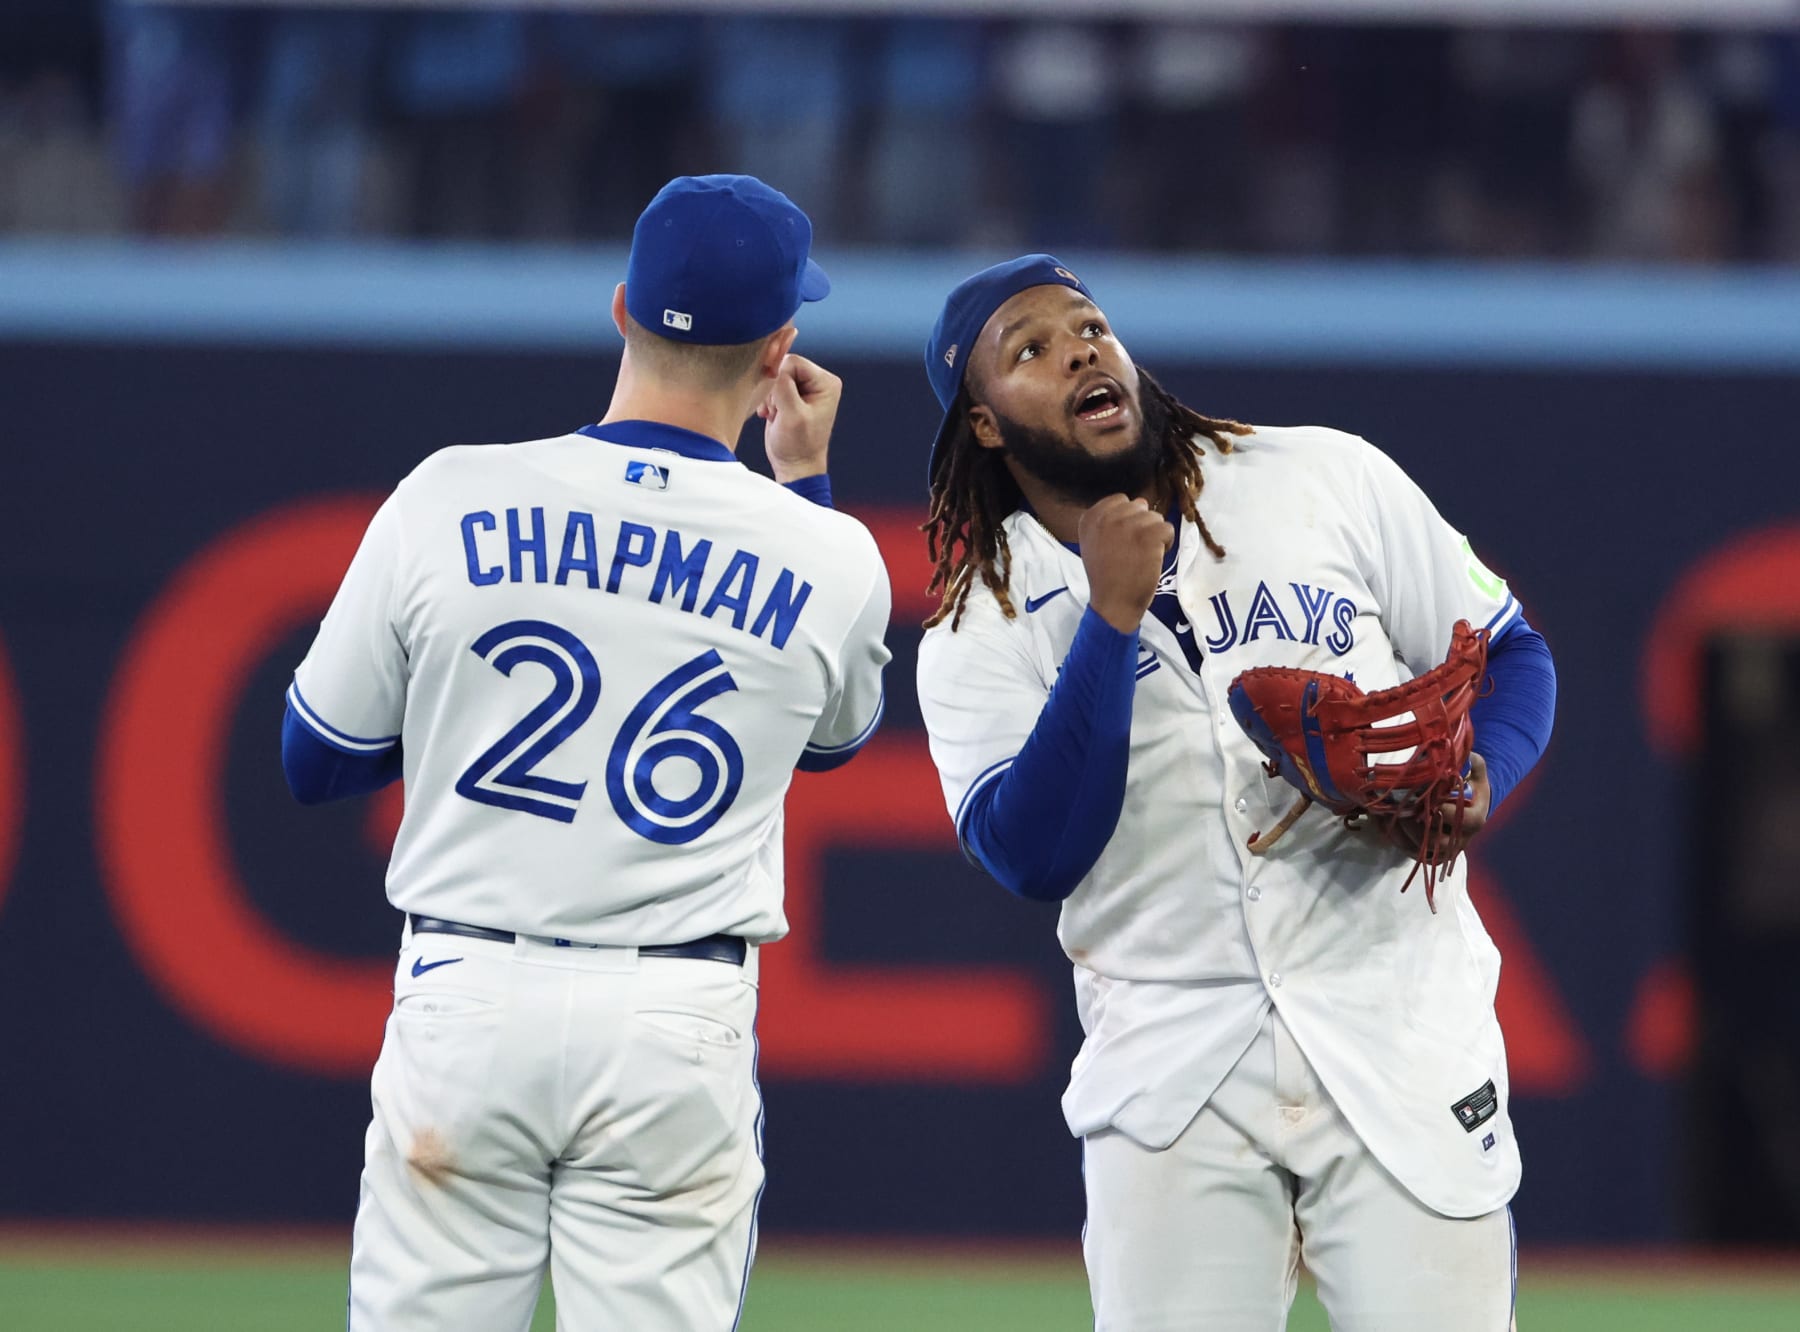 MLB Playoffs Preview: Blue Jays have a dangerous offense